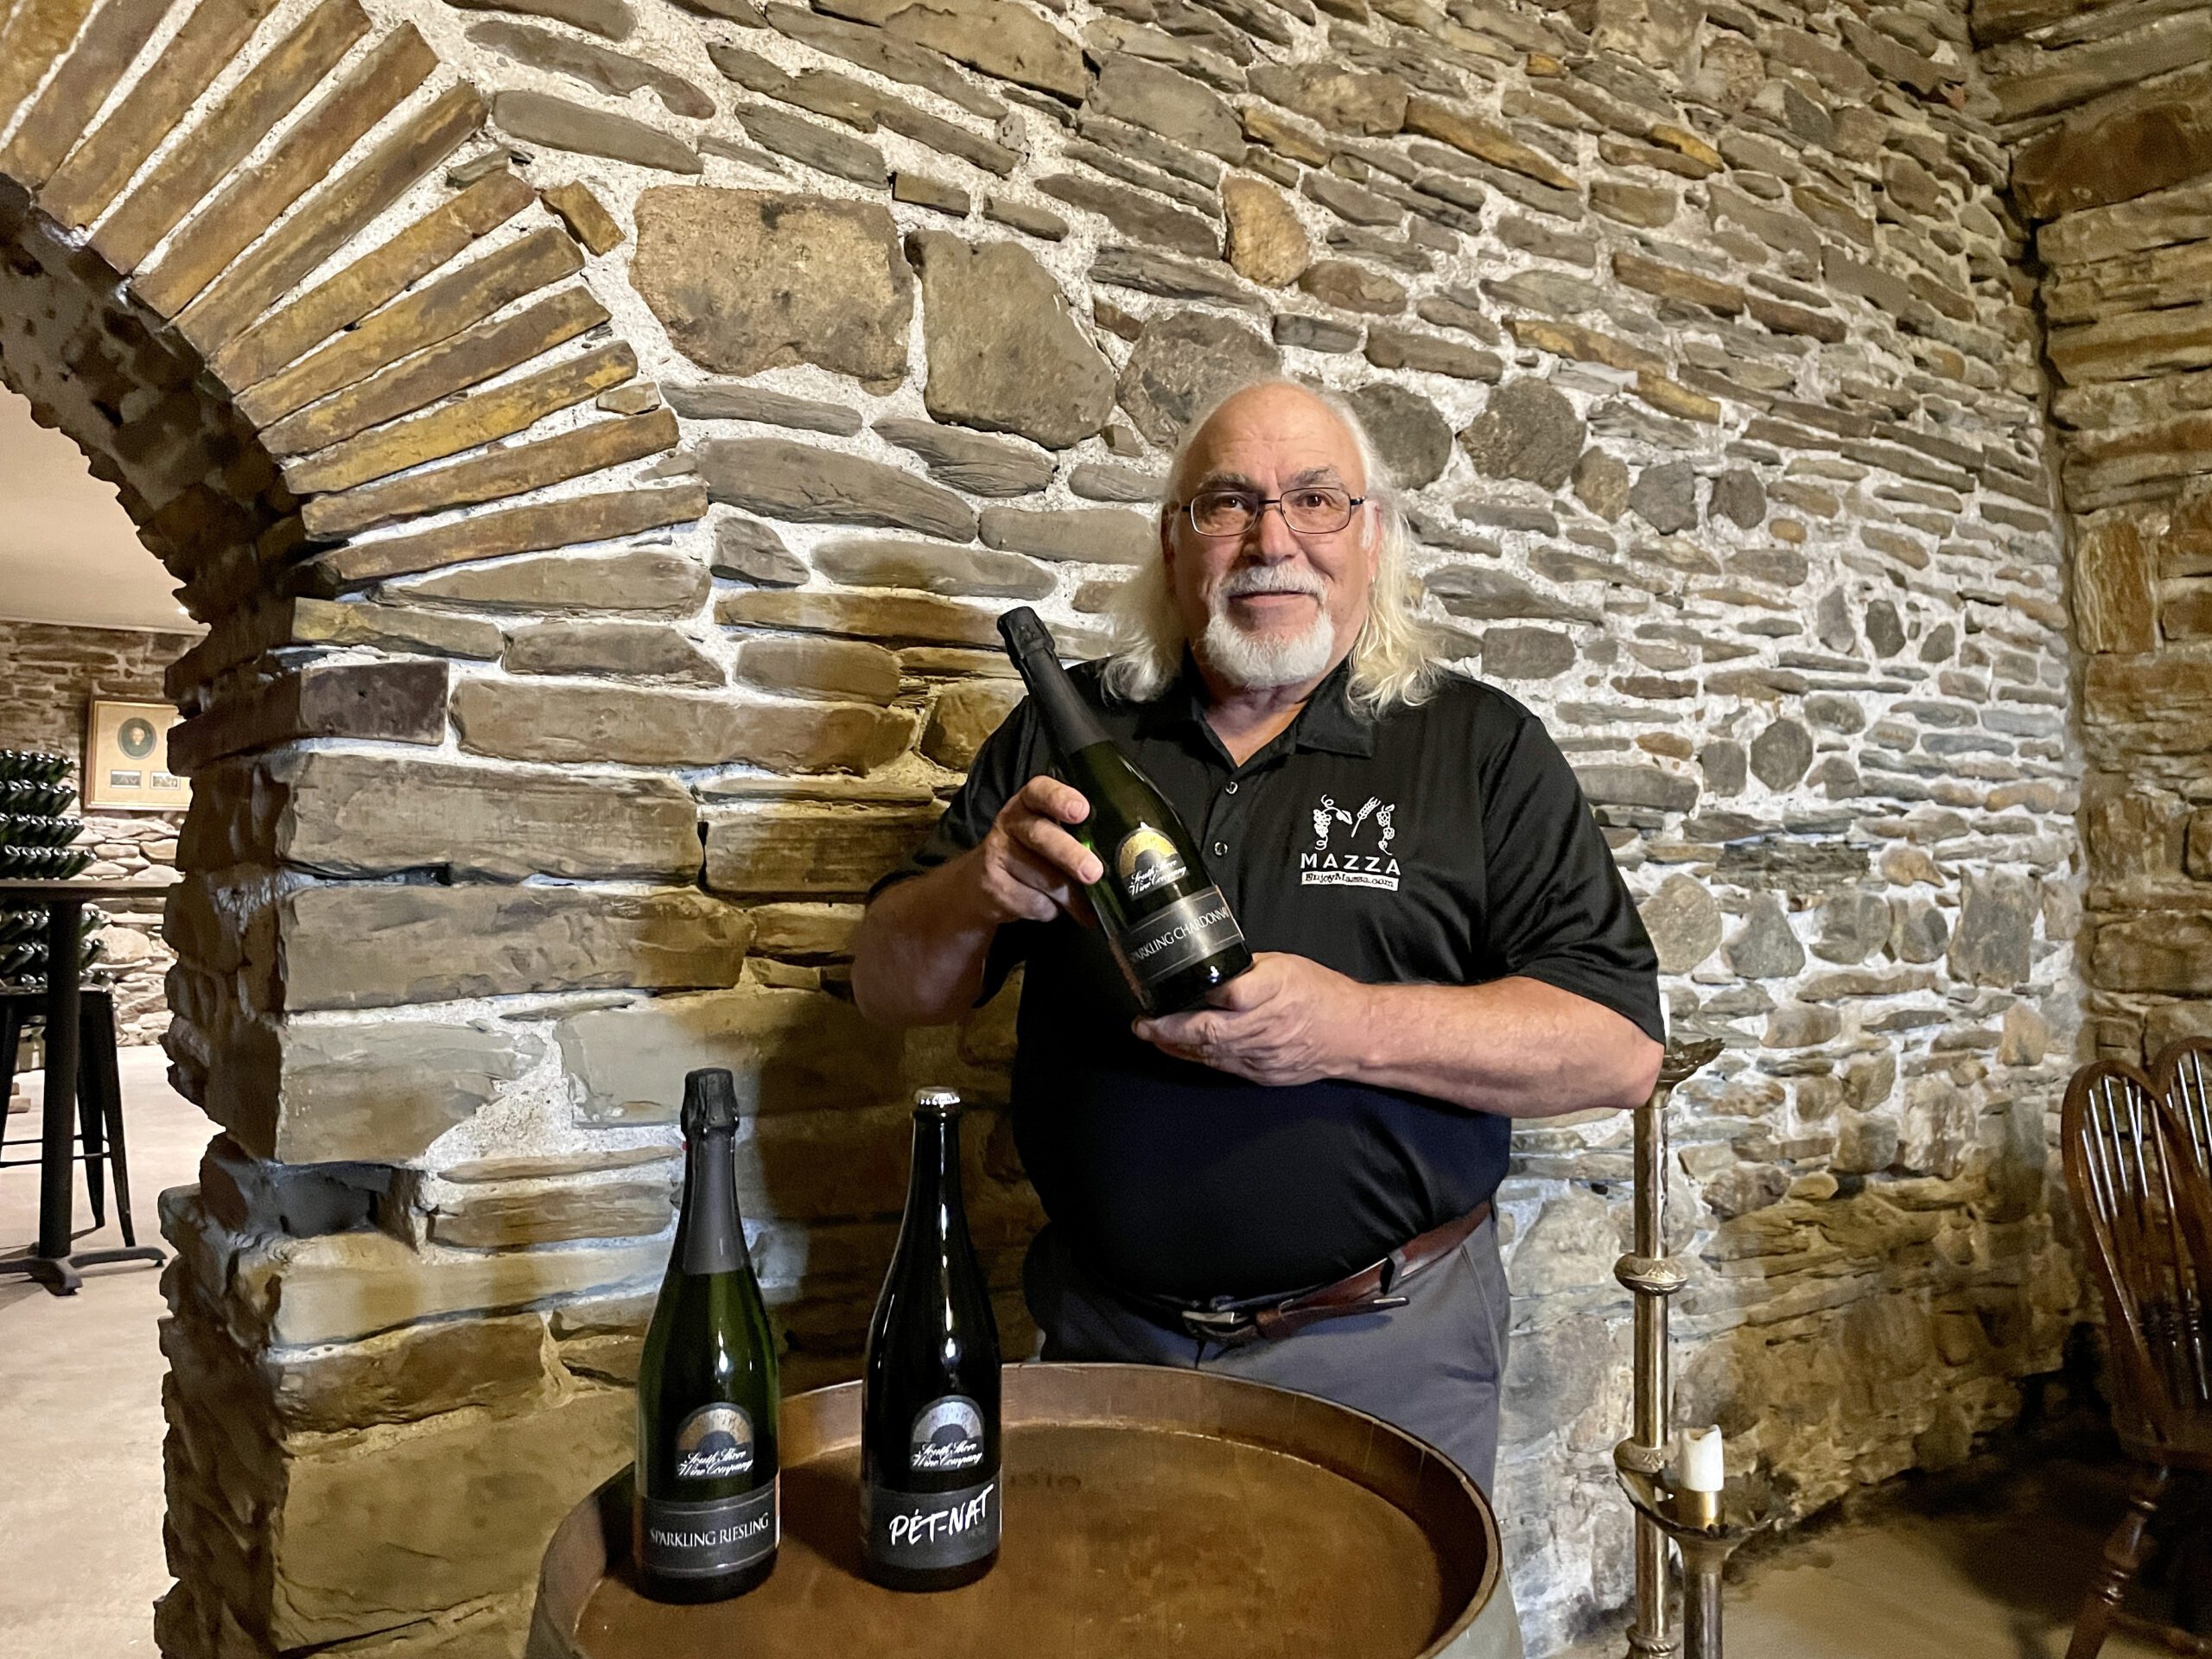 South Shore Sparkling Chardonnay Wins PA Wine Excellence Competition